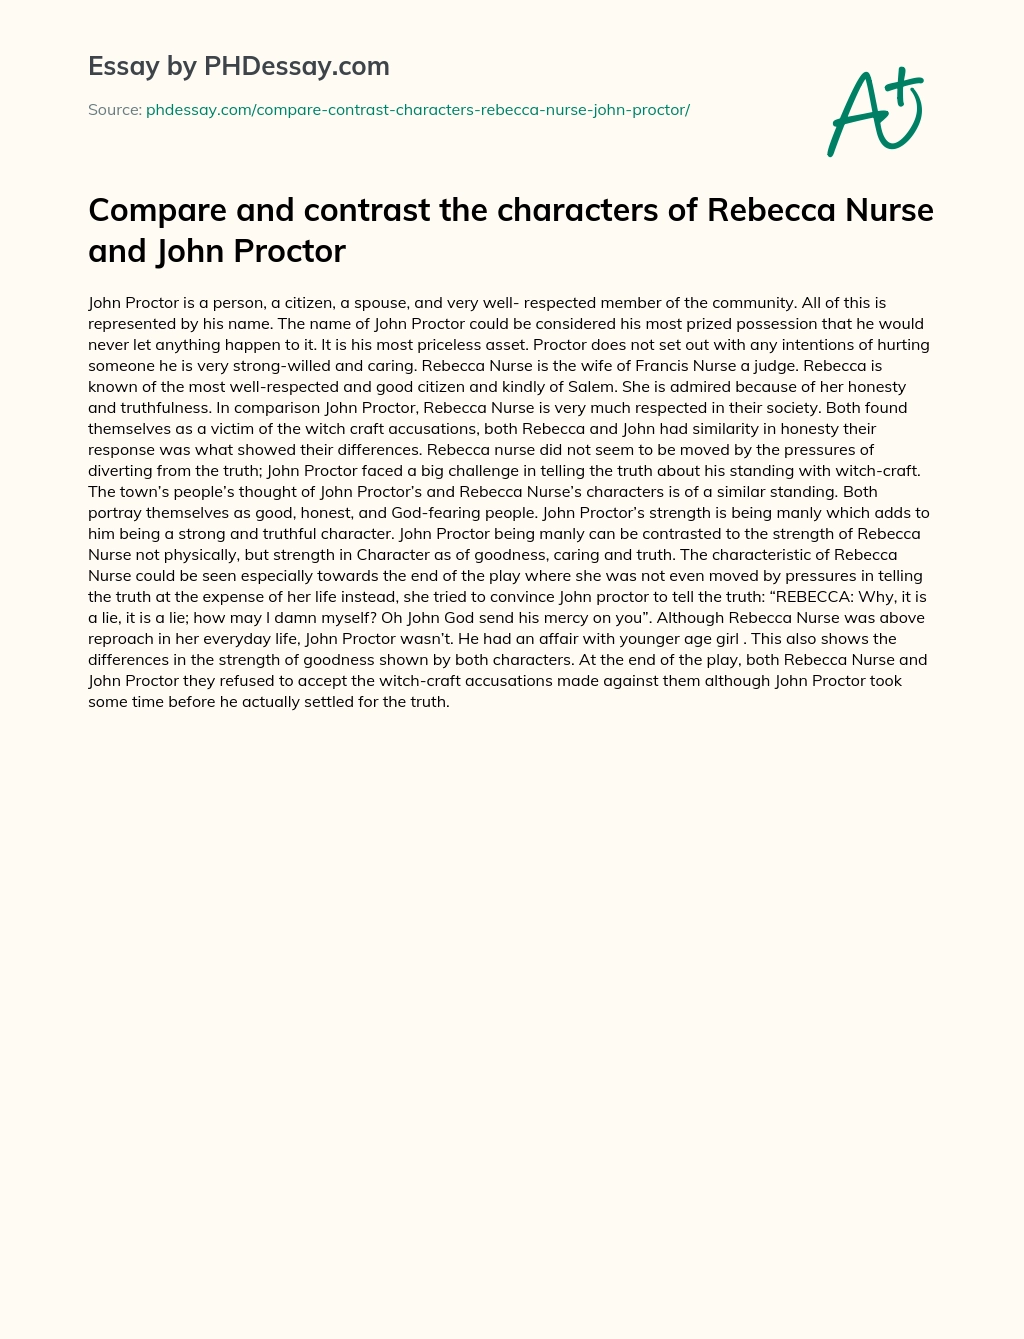 Compare and contrast the characters of Rebecca Nurse and John Proctor essay